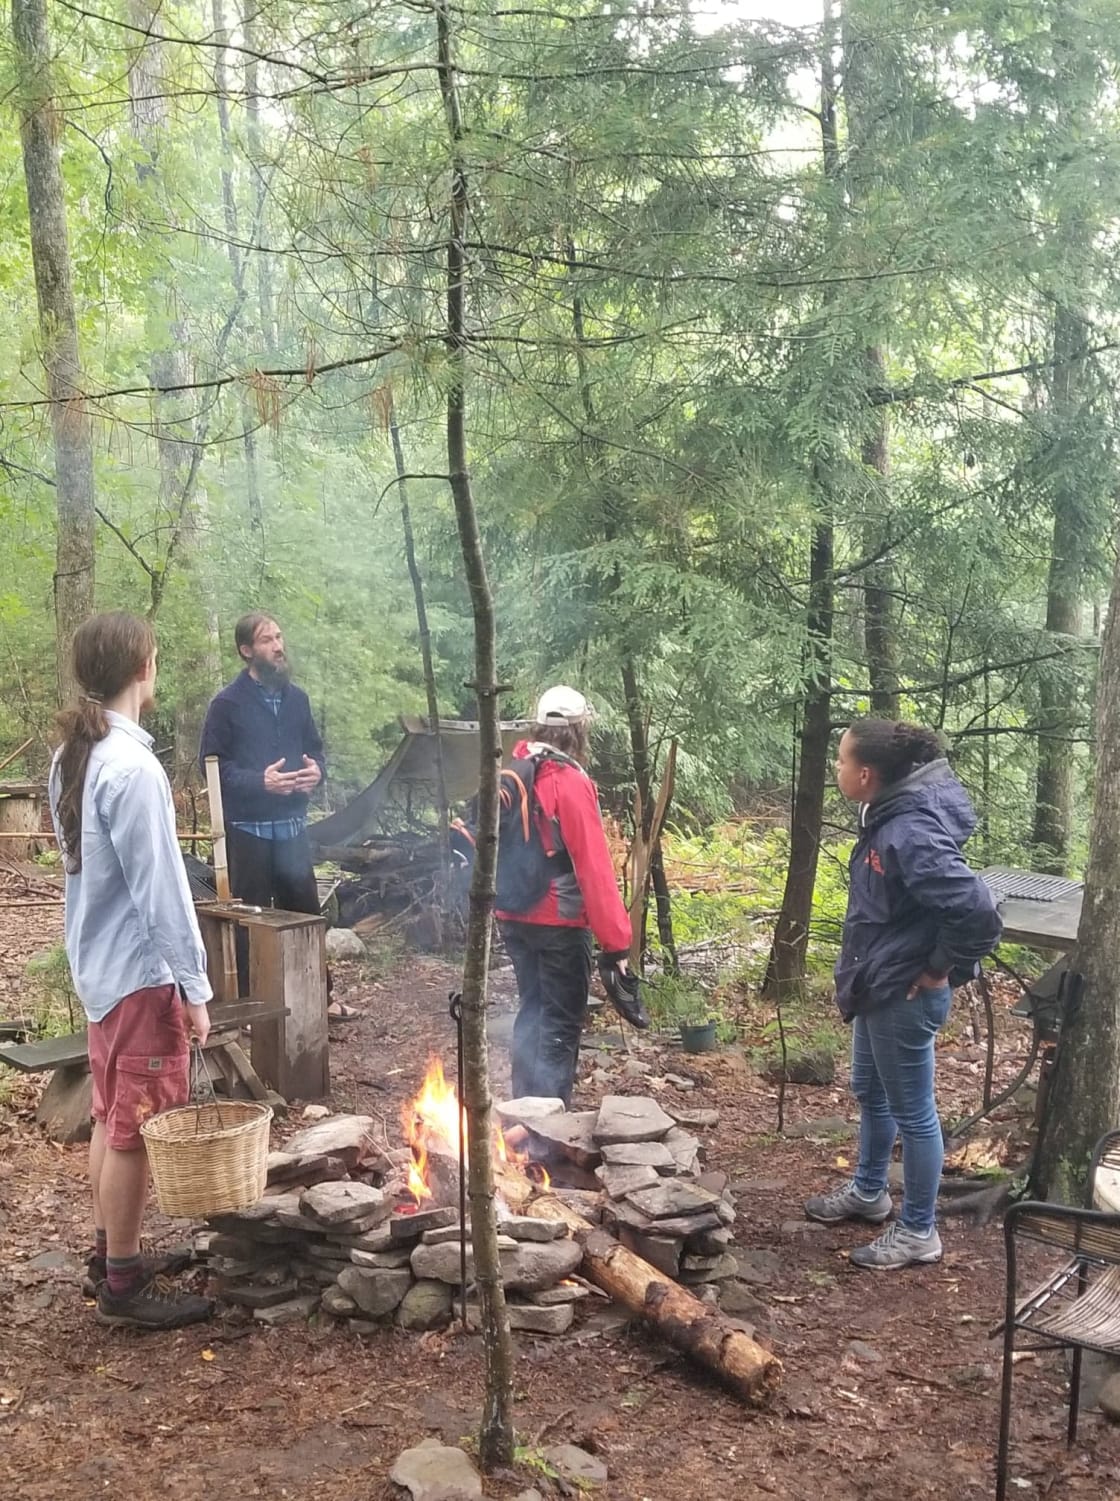 Here is your host, Nathaniel Whitmore, with some students of his herbal apprenticeship.  Campsites are not available during herbal apprenticeship weekends.  Occasionally, Nathaniel offers mushroom and/or plant walks on weekends.  See nathanielwhitmore.com